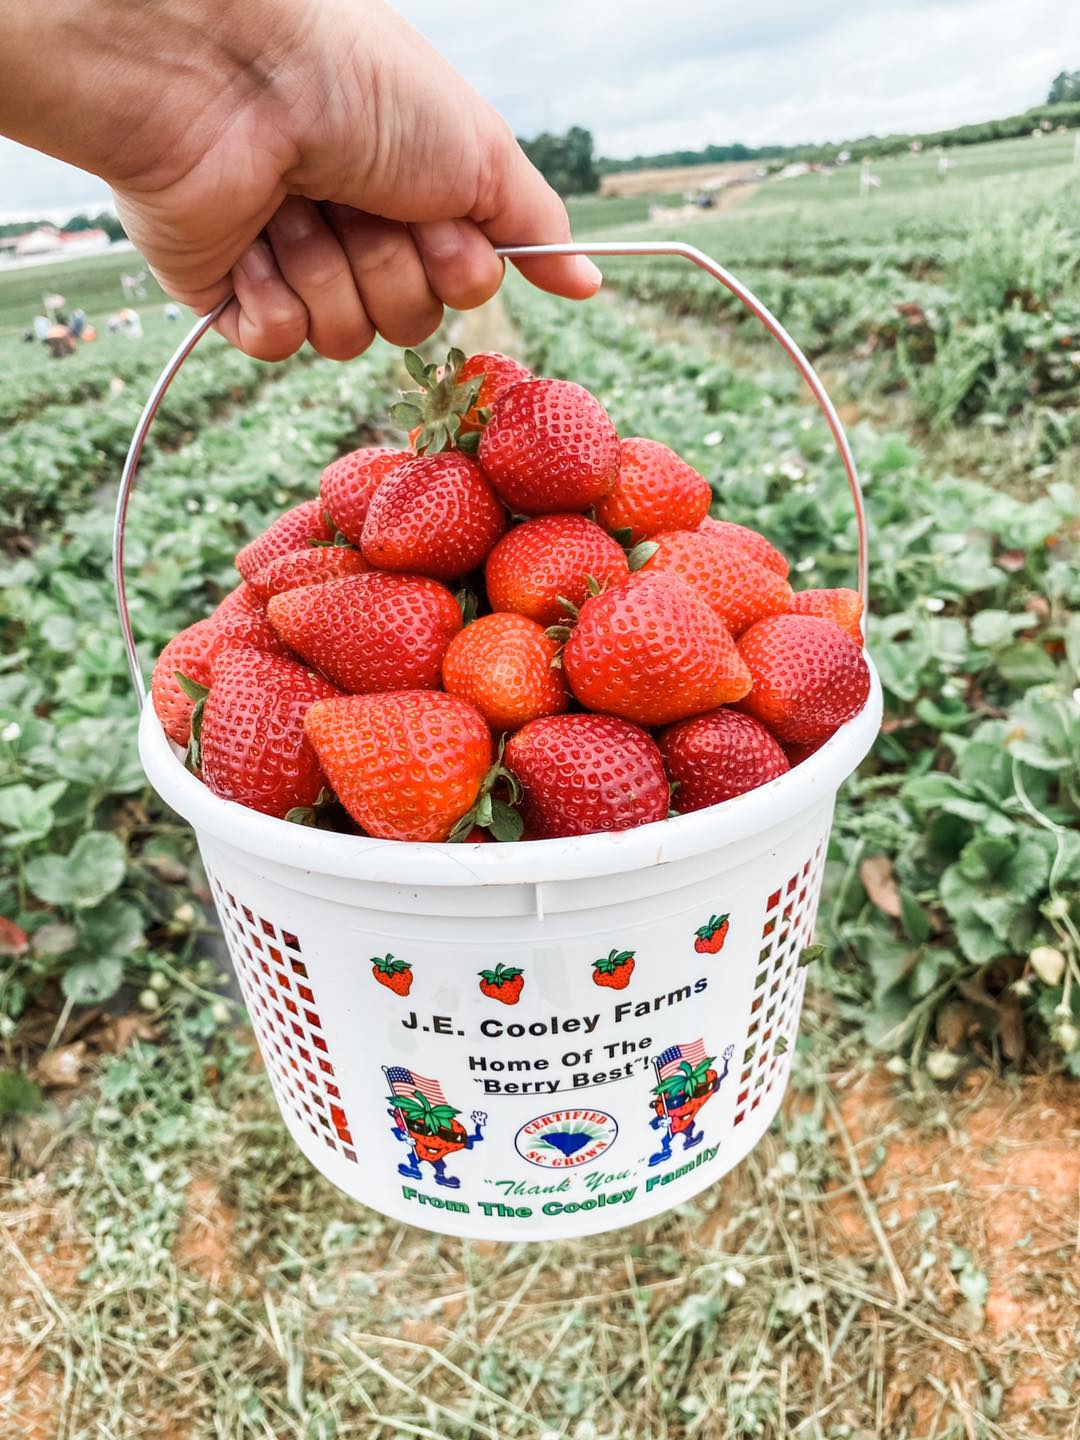 Strawberries in a bucket as a market treat in South Carolina